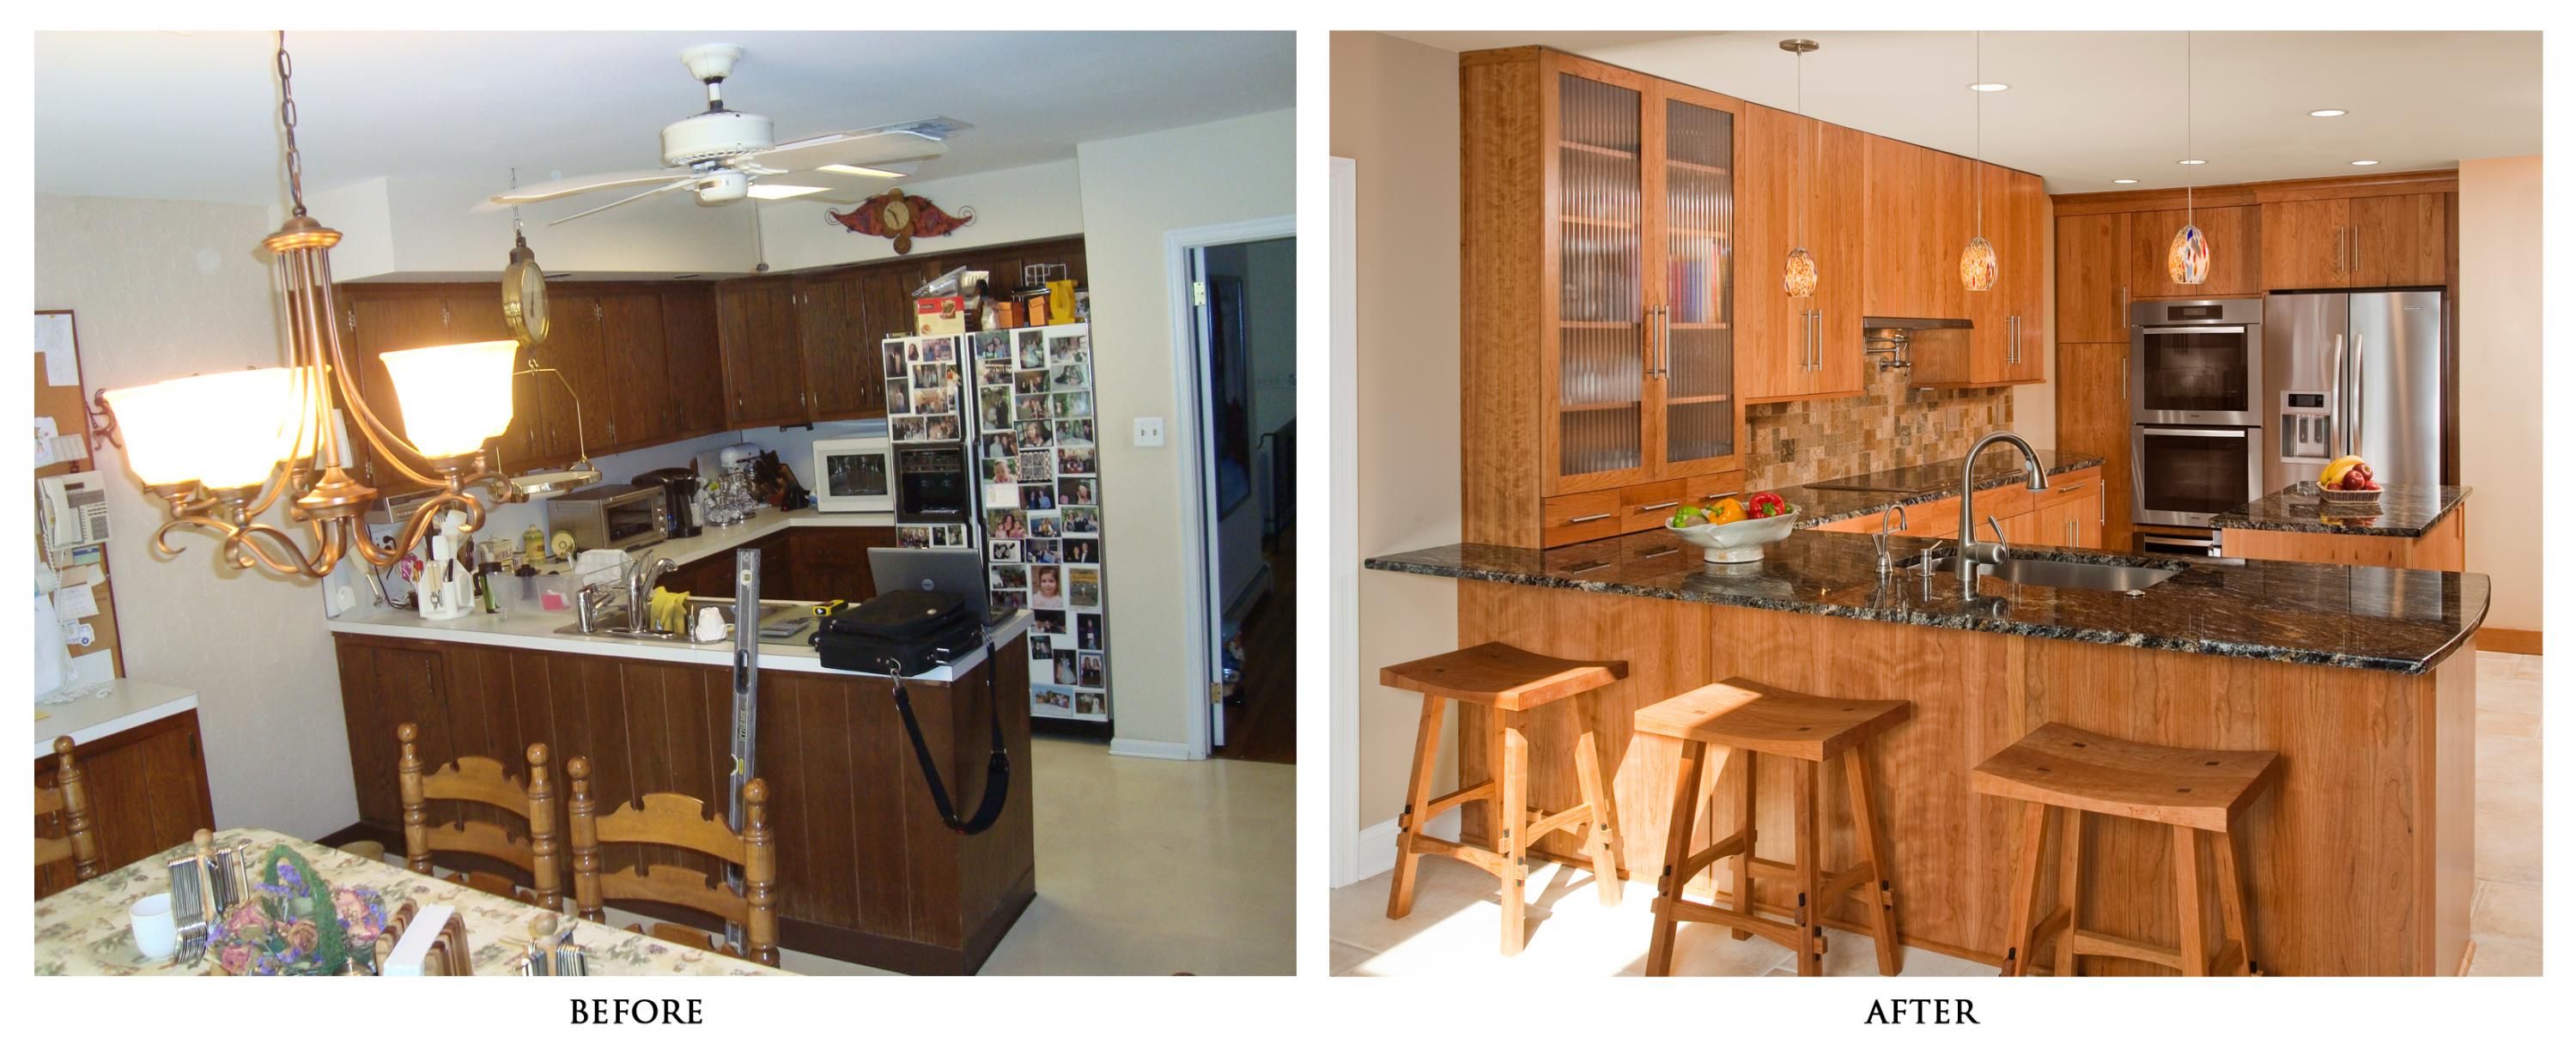 Kitchen Kitchen Remodel Before And After Monduduckdns With Regard To Elegant Property Kitchen Remodel Before And After Kitchen Remodel Before And After For Invigorate Repair Faucet Resin Floor Combustible Cabinet Eyewash Faucet Hazardous Cabinets 